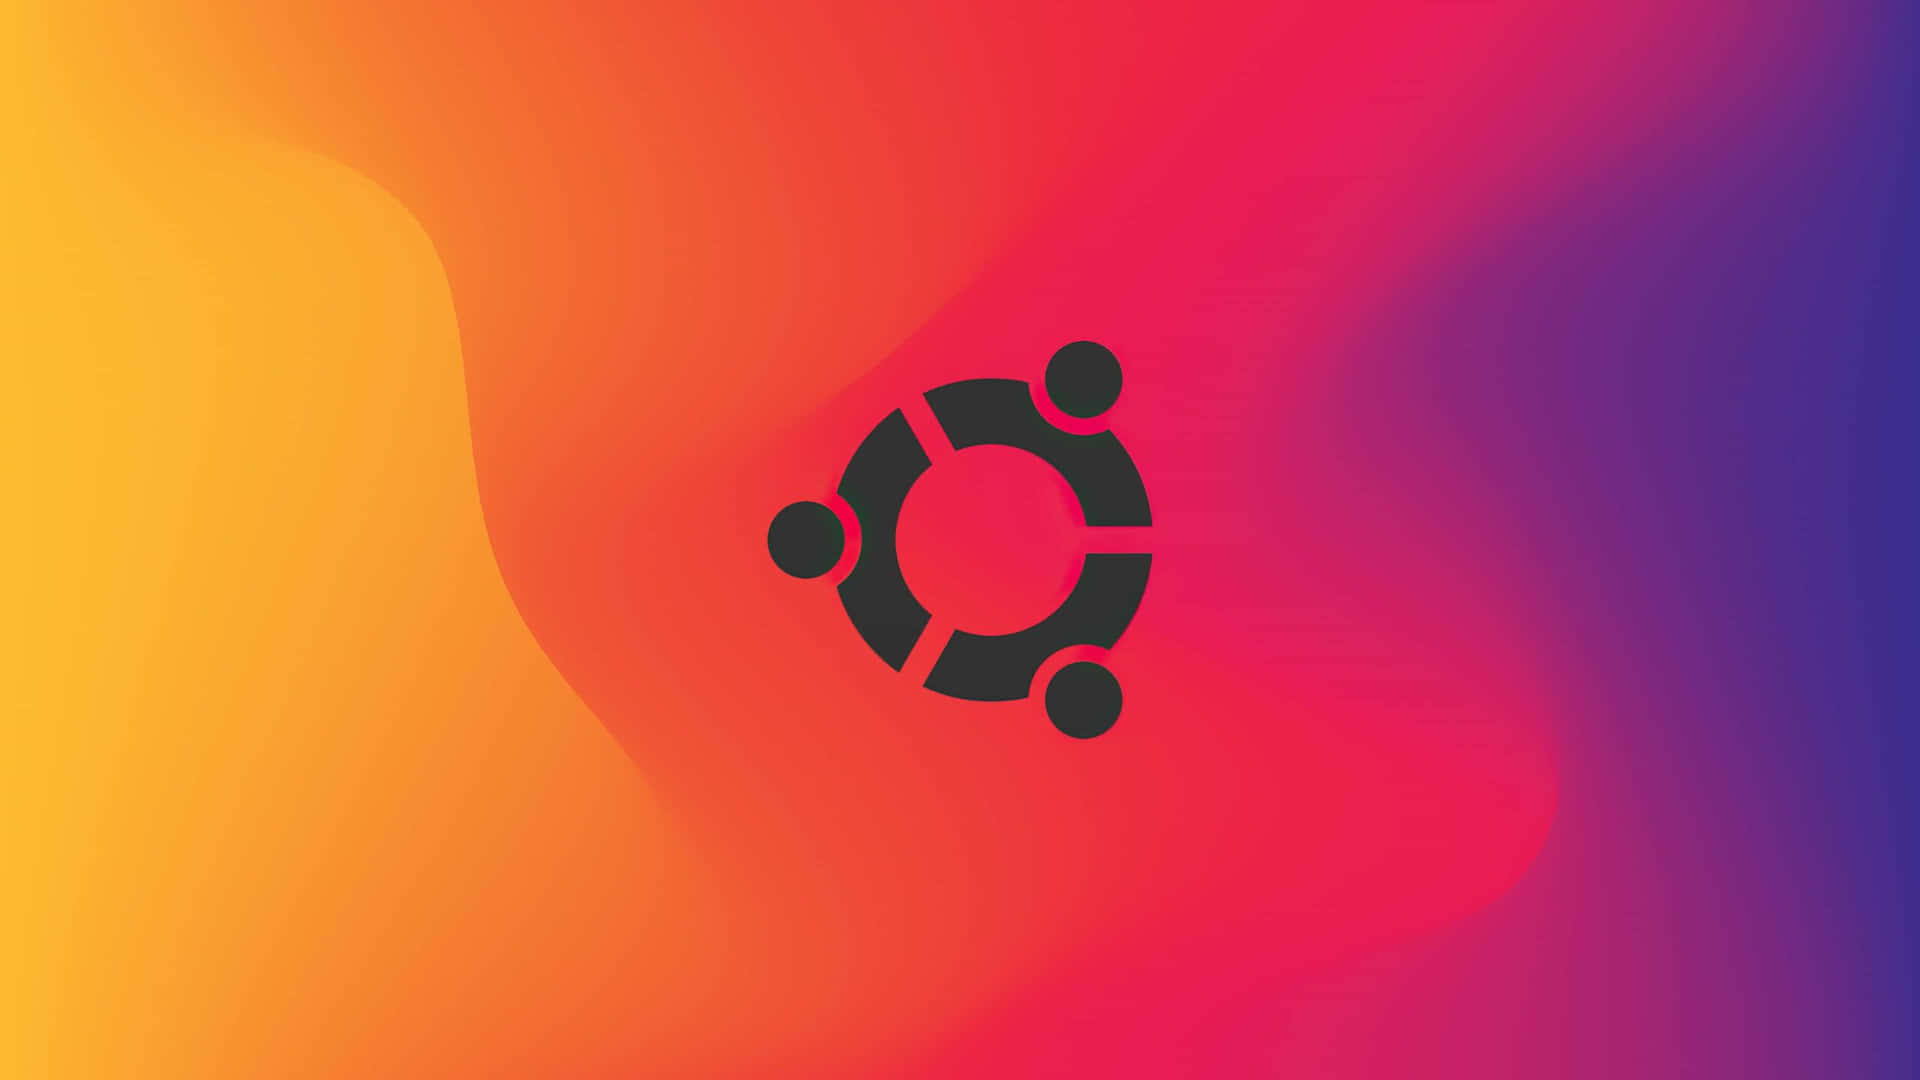 Welcome to Ubuntu, the world's most popular open source operating system